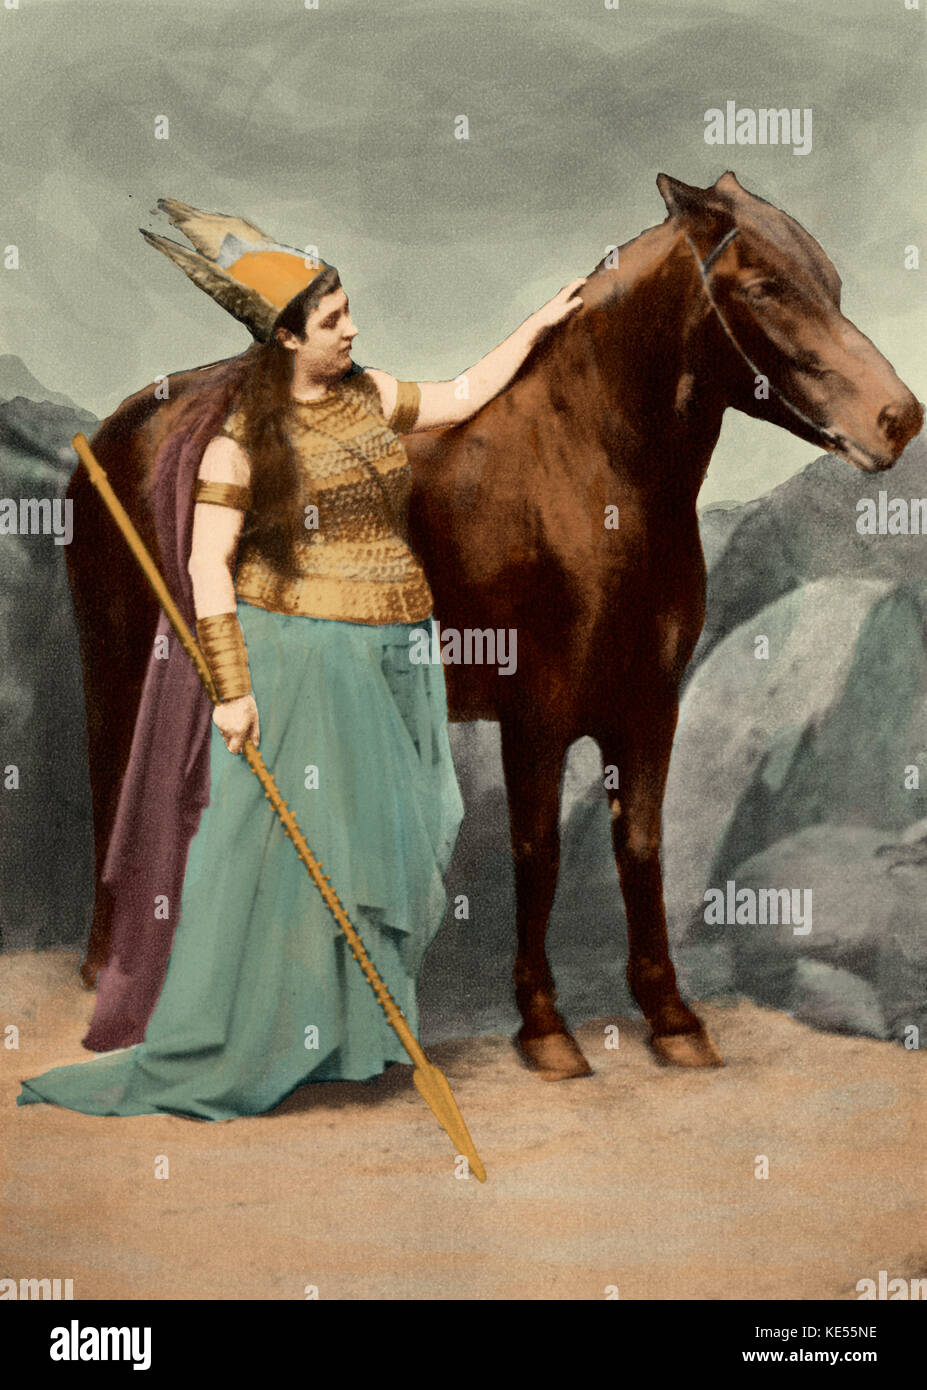 MATERNA, Amalie as Brunnhilde 1844-1918. Austrian soprano. 1st Bayreuth Brunnhilde in 1876 and first Brunnhilde at New York  Metropolitan Opera premiere 30 January  1885 of Walkure by Wagner. (Does not appear in Rhinegold) Walkure / Valkyrie / Walkyrie, Ring Cycle / Nibelungen. Colourised version. German composer & author, 22 May 1813 - 13 February 1883. Stock Photo